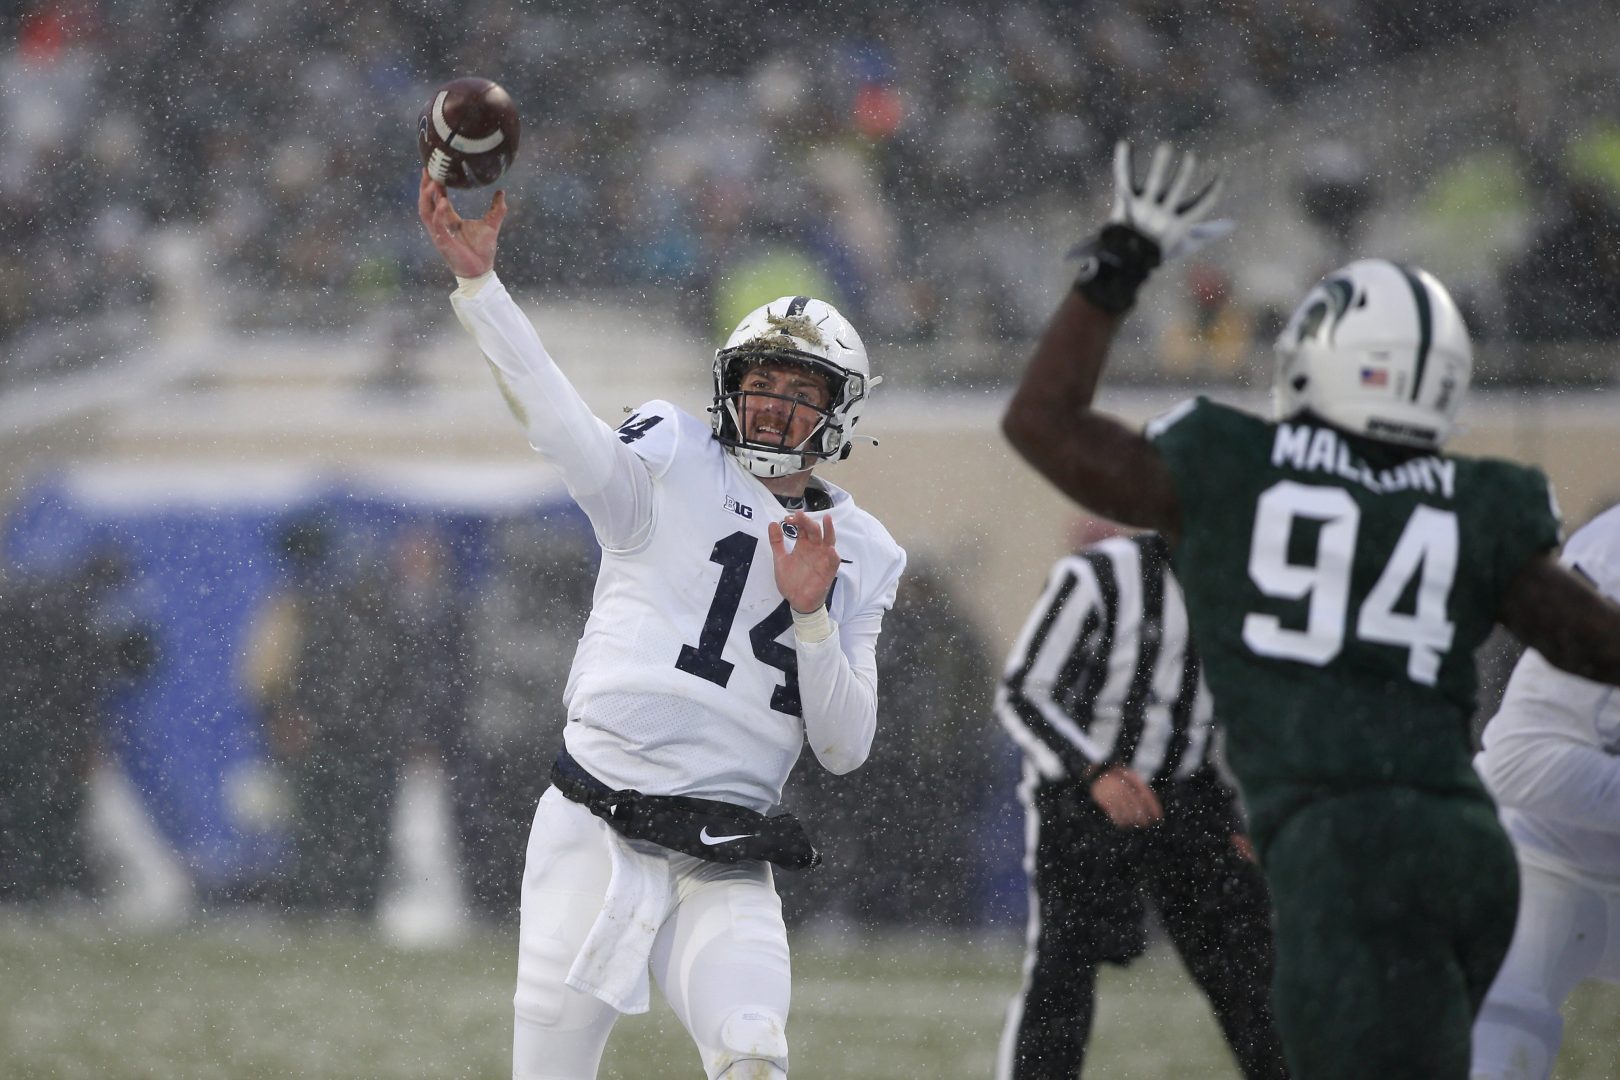 Penn State quarterback Sean Clifford, left, throws a pass for a touchdown against Michigan State's Dashaun Mallory (94) during the first quarter of an NCAA college football game, Saturday, Nov. 27, 2021, in East Lansing, Mich. (AP Photo/Al Goldis)